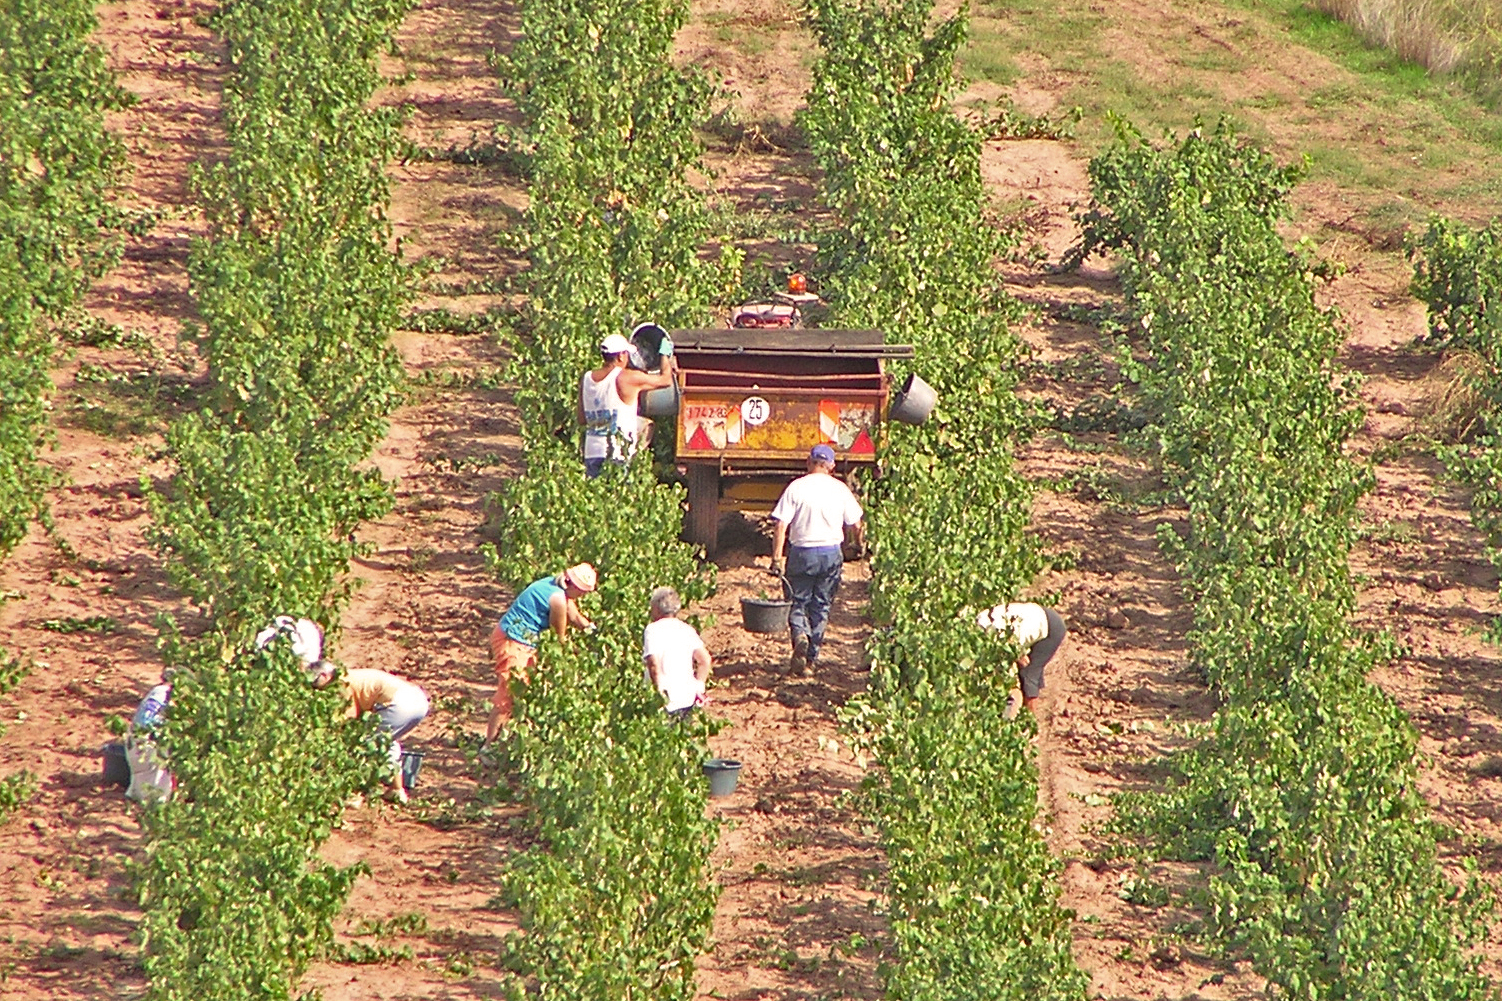 Grape pickers in France